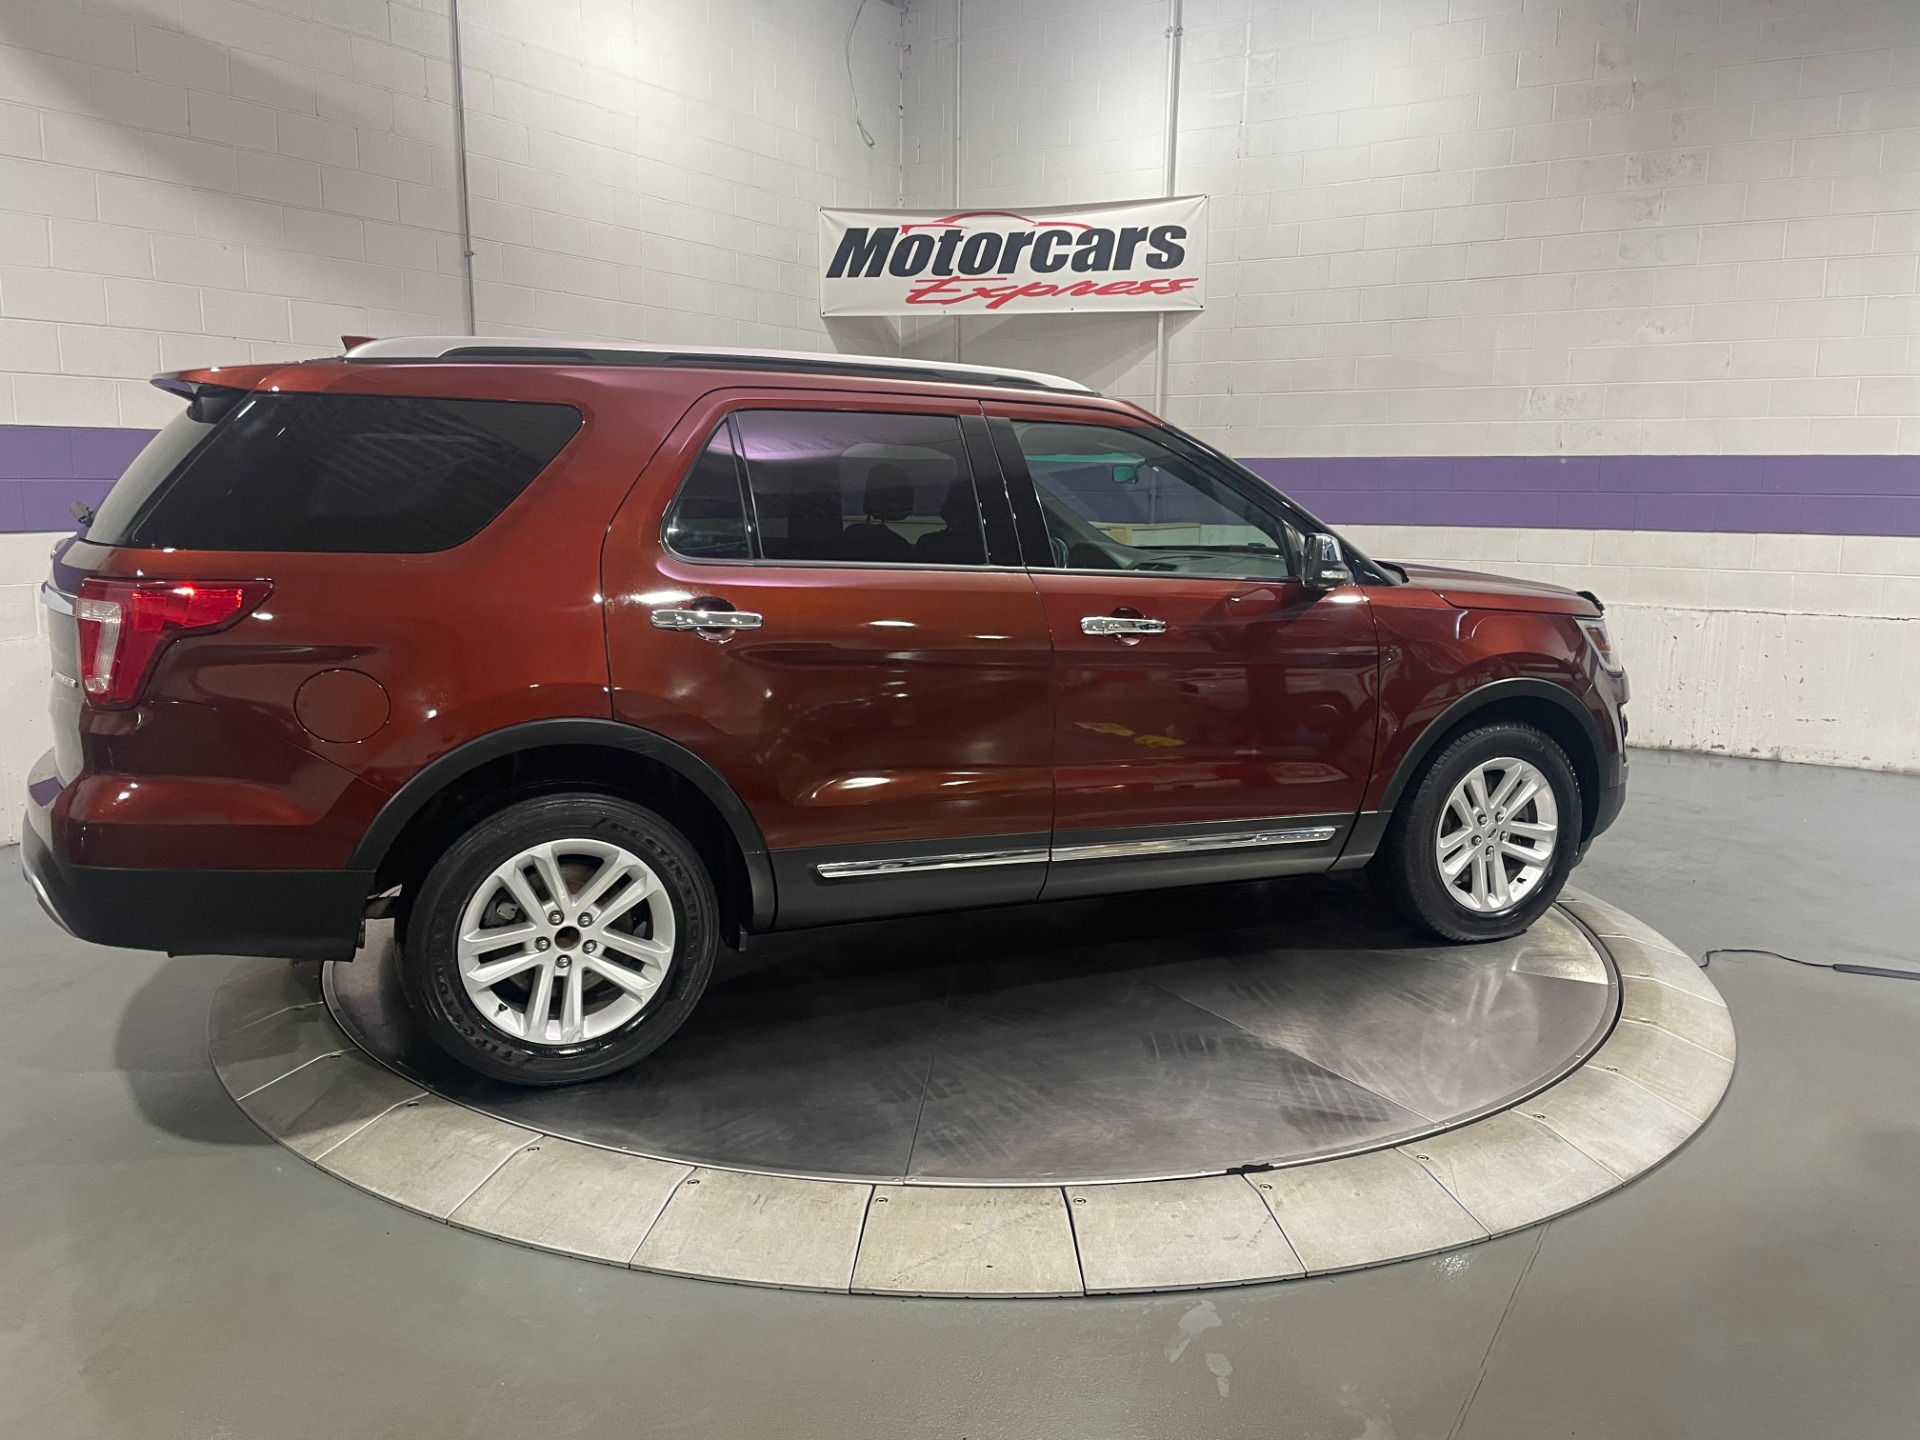 Used-2016-Ford-Explorer-XLT-FWD